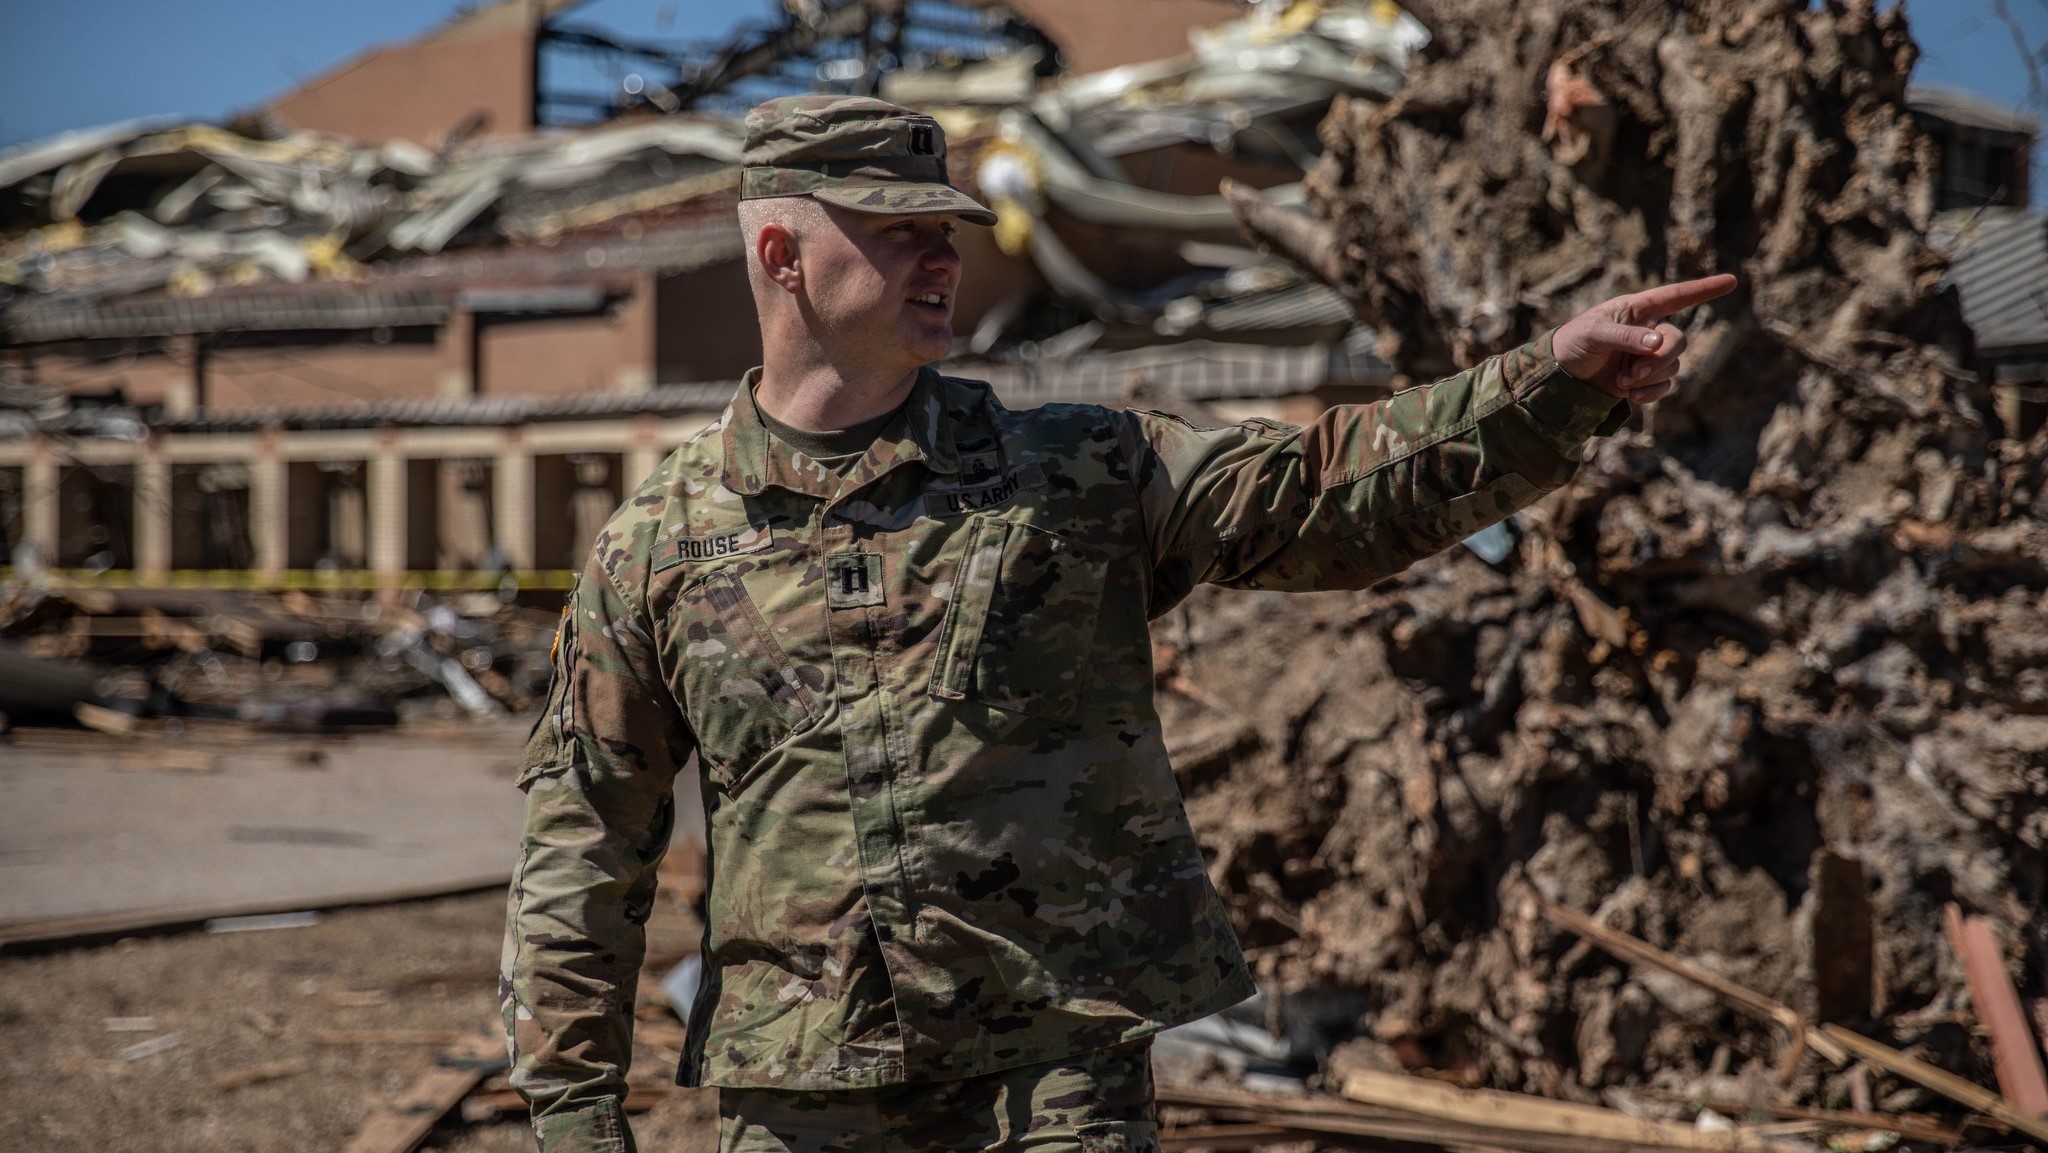 National Guard troops mobilized to help in rescue efforts after tornadoes hit Arkansas